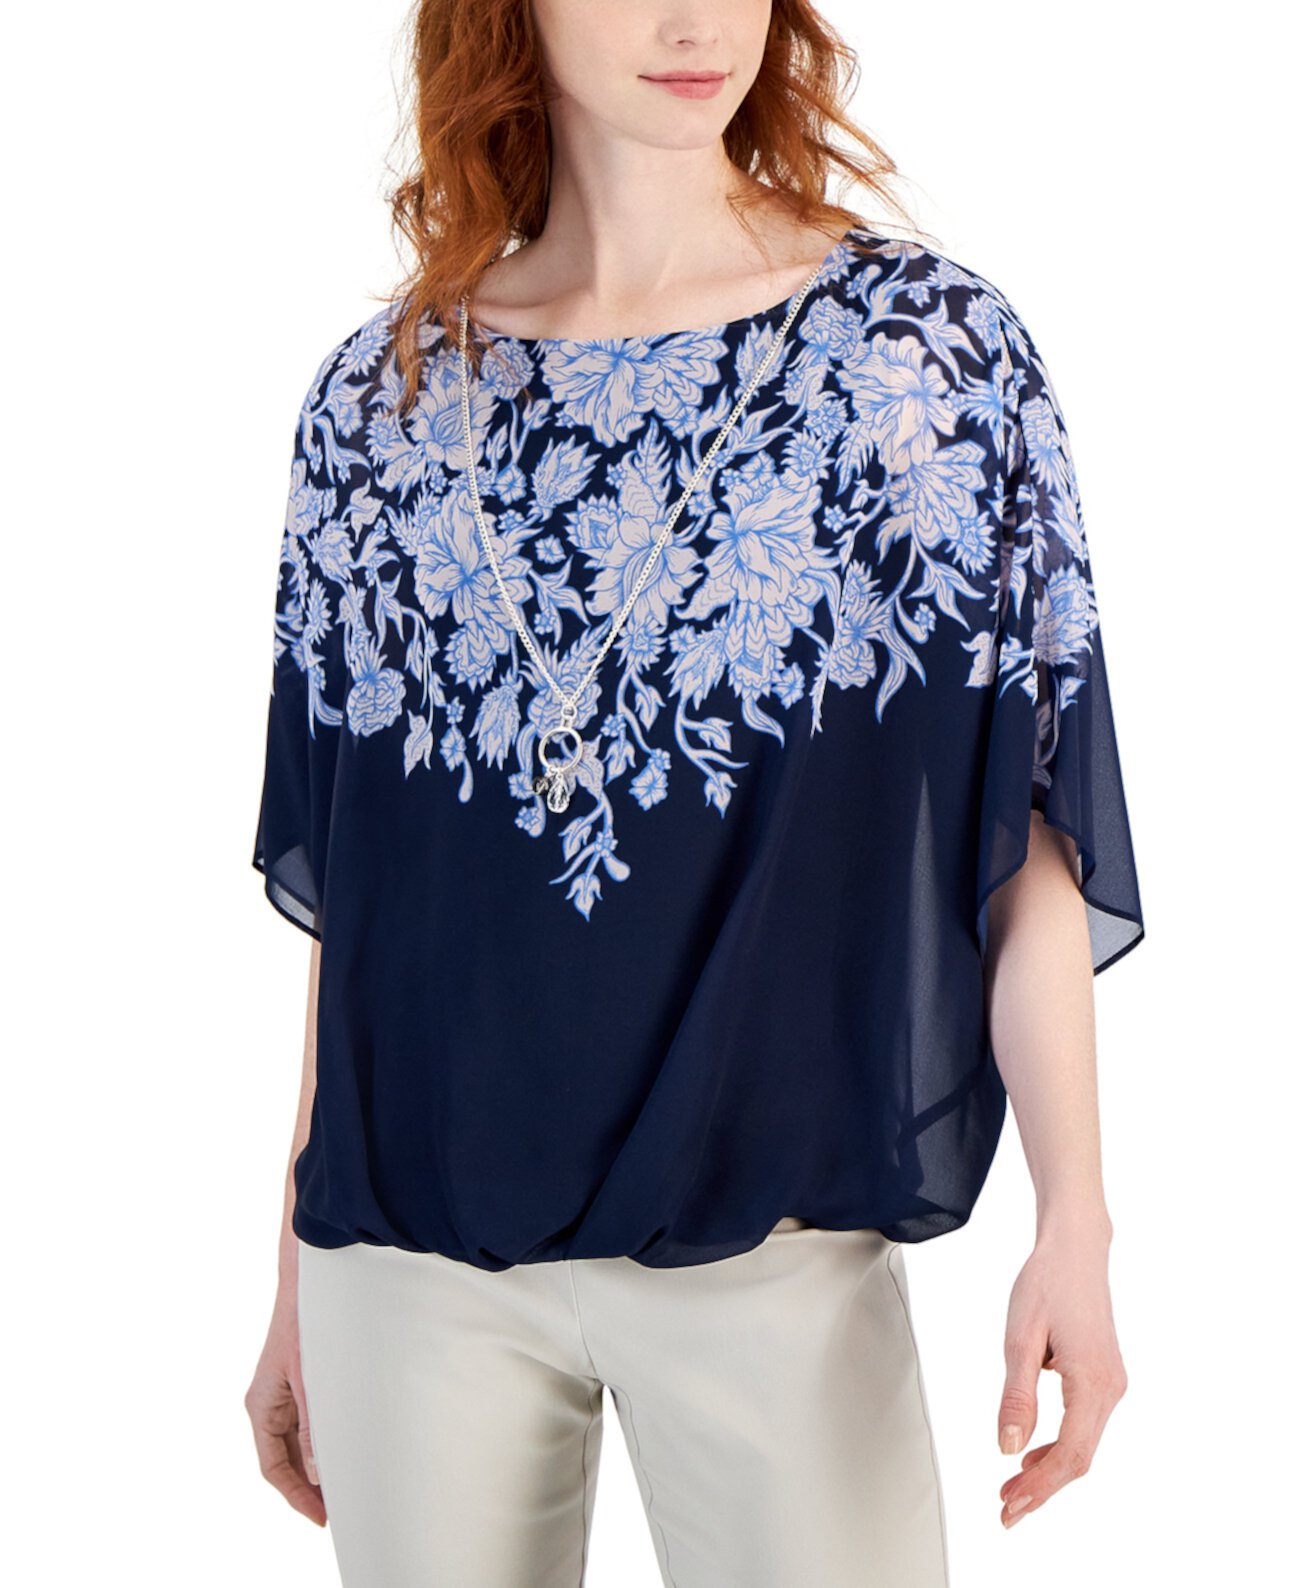 Women's Printed Poncho-Sleeve Necklace Top, Created for Macy's J&M Collection